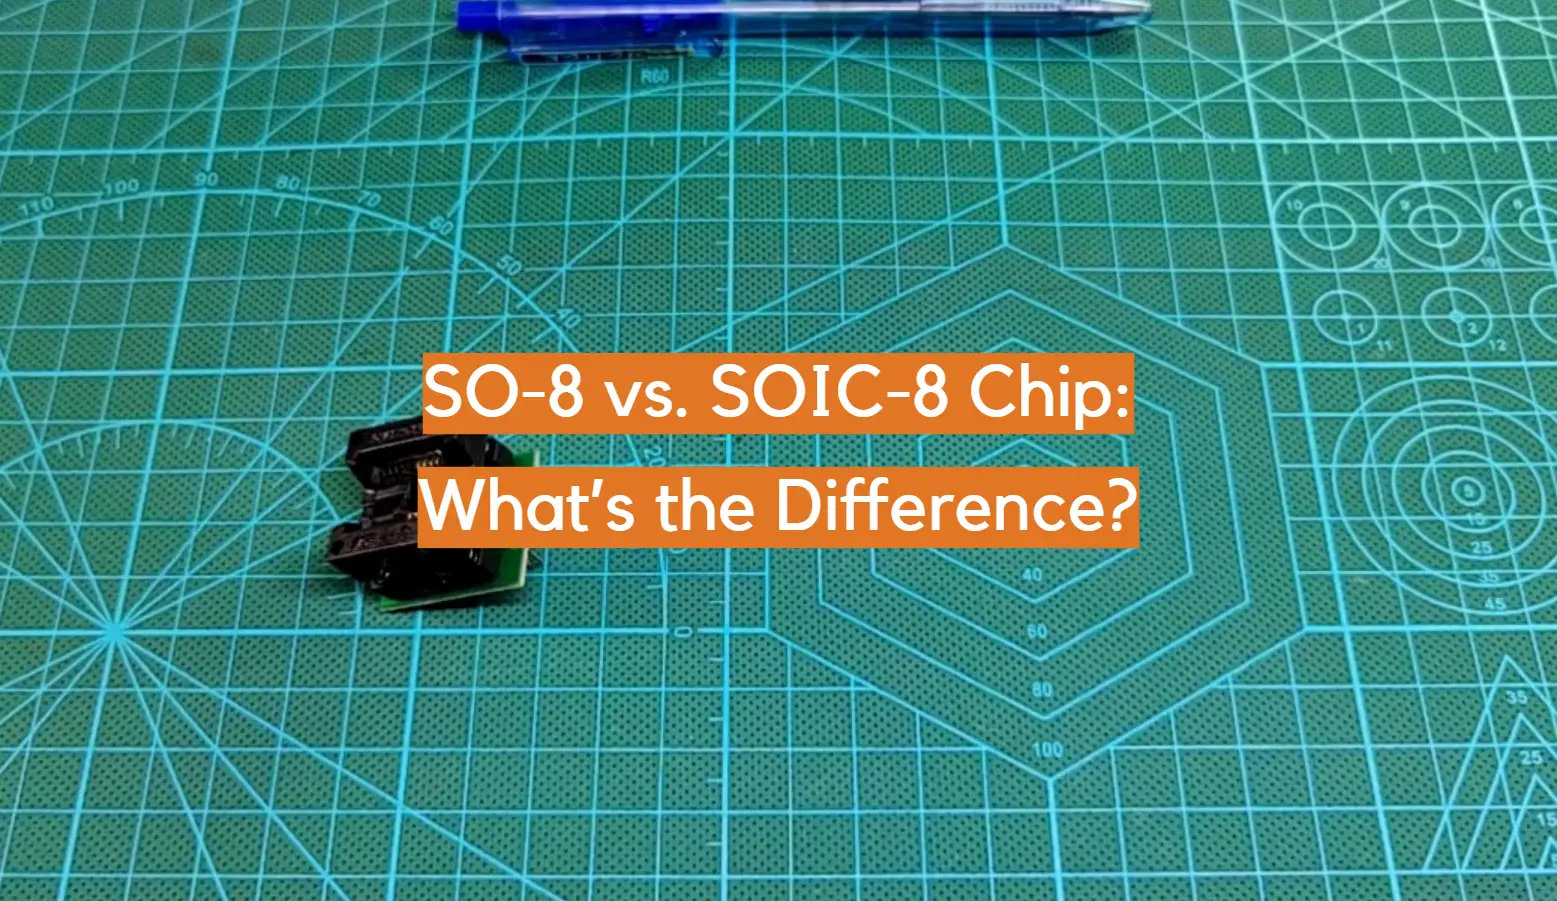 SO-8 vs. SOIC-8 Chip: What’s the Difference?